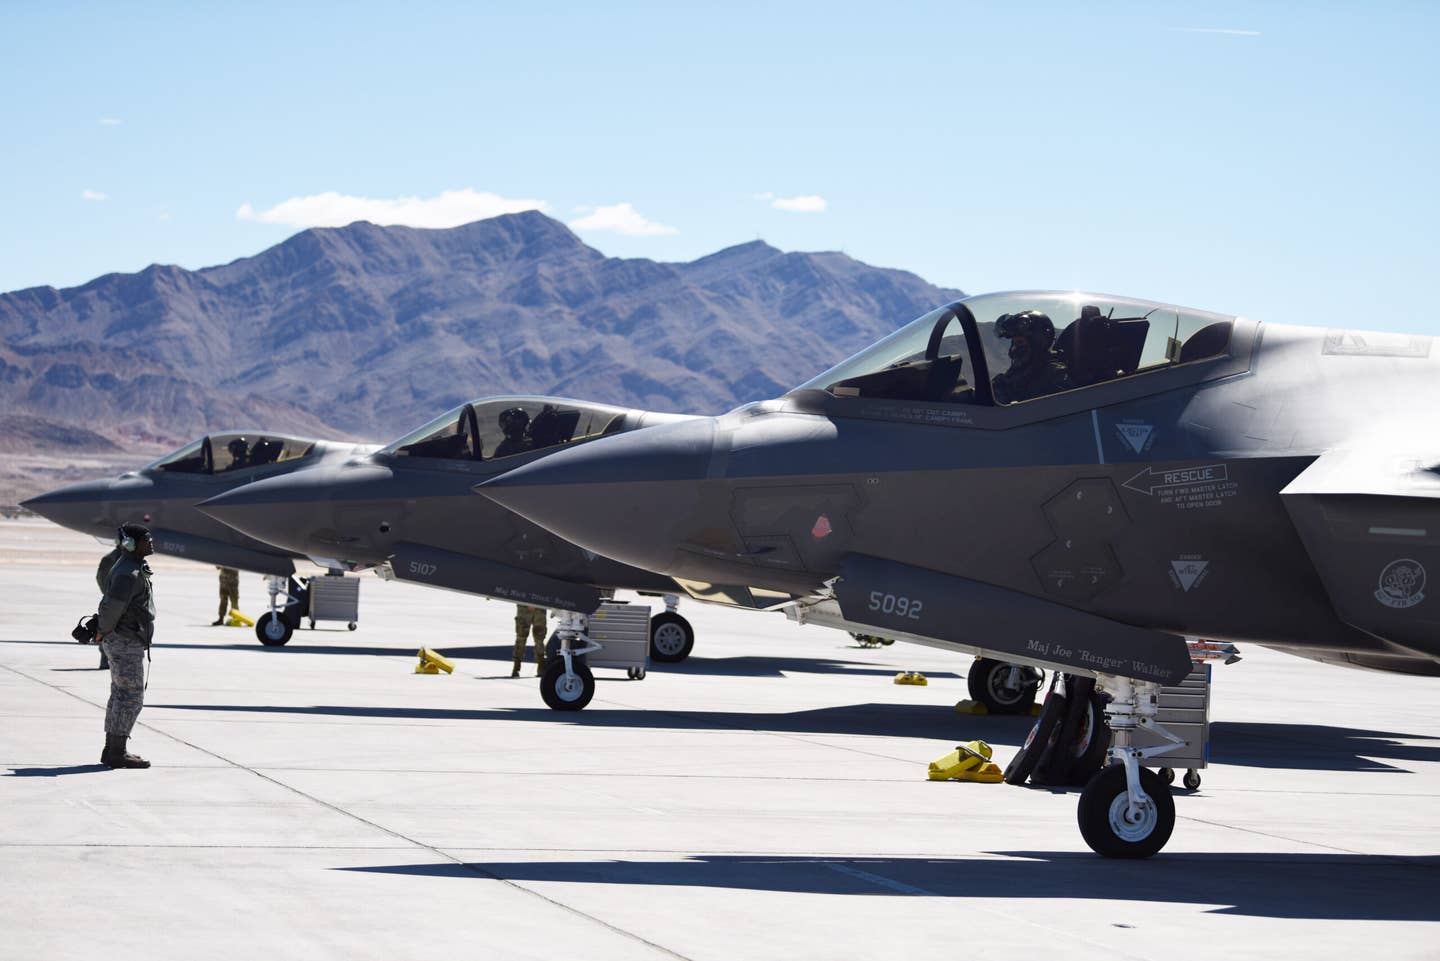 Three F-35As assigned to the 62nd Fighter Squadron at Luke Air Force Base, Arizona, lined up and ready to take off on a mission. <em>U.S. Air Force</em>